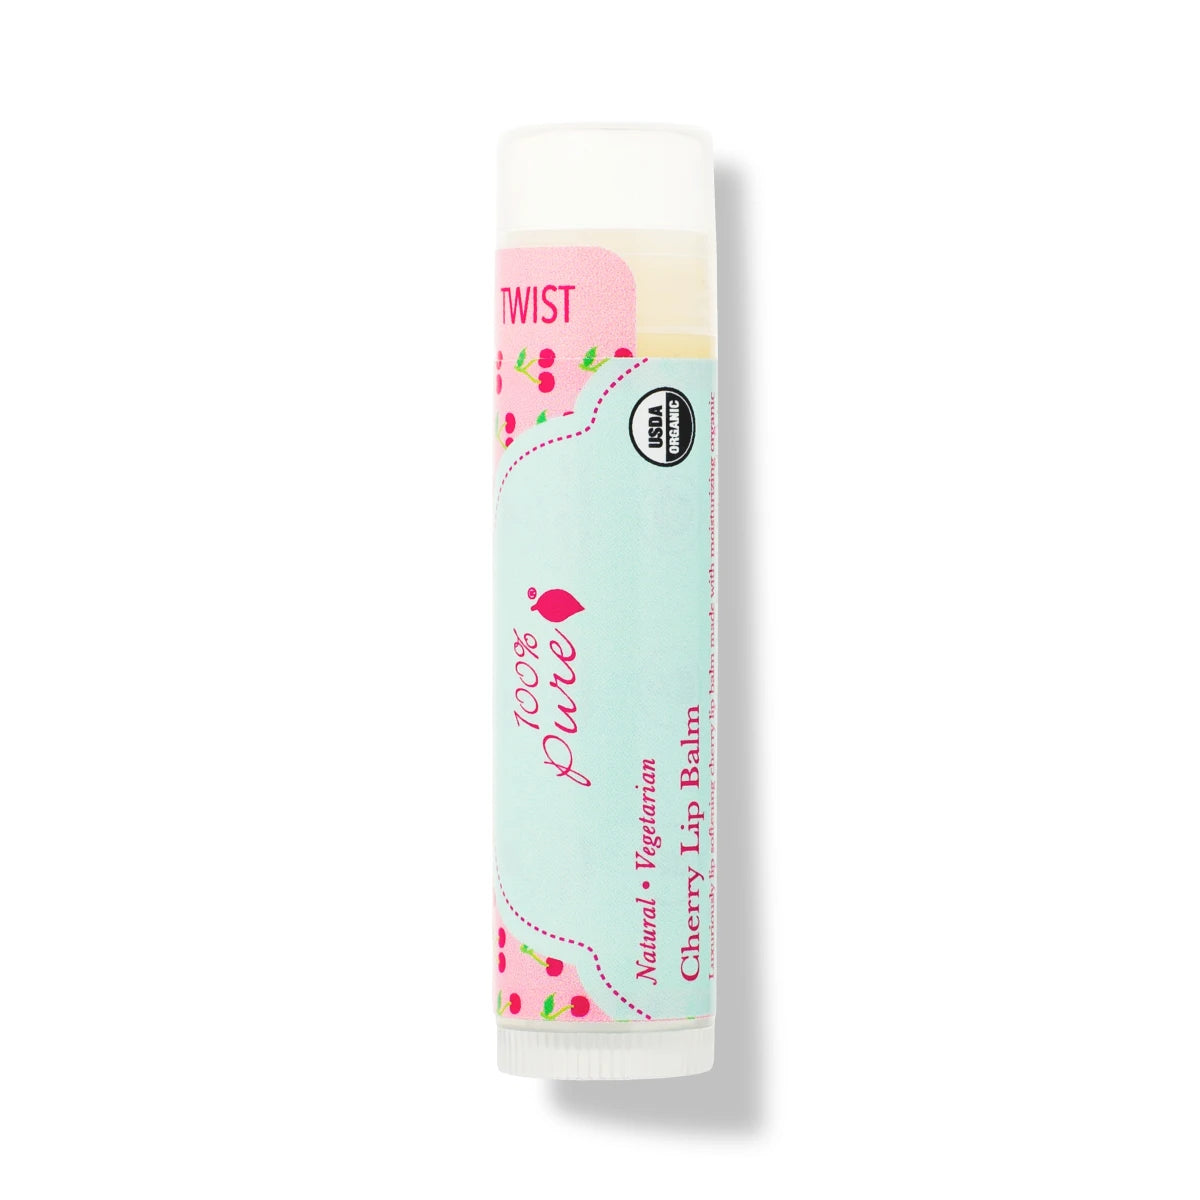 100%_pure_lip_balm_uae_middle_east_the_skincare_district